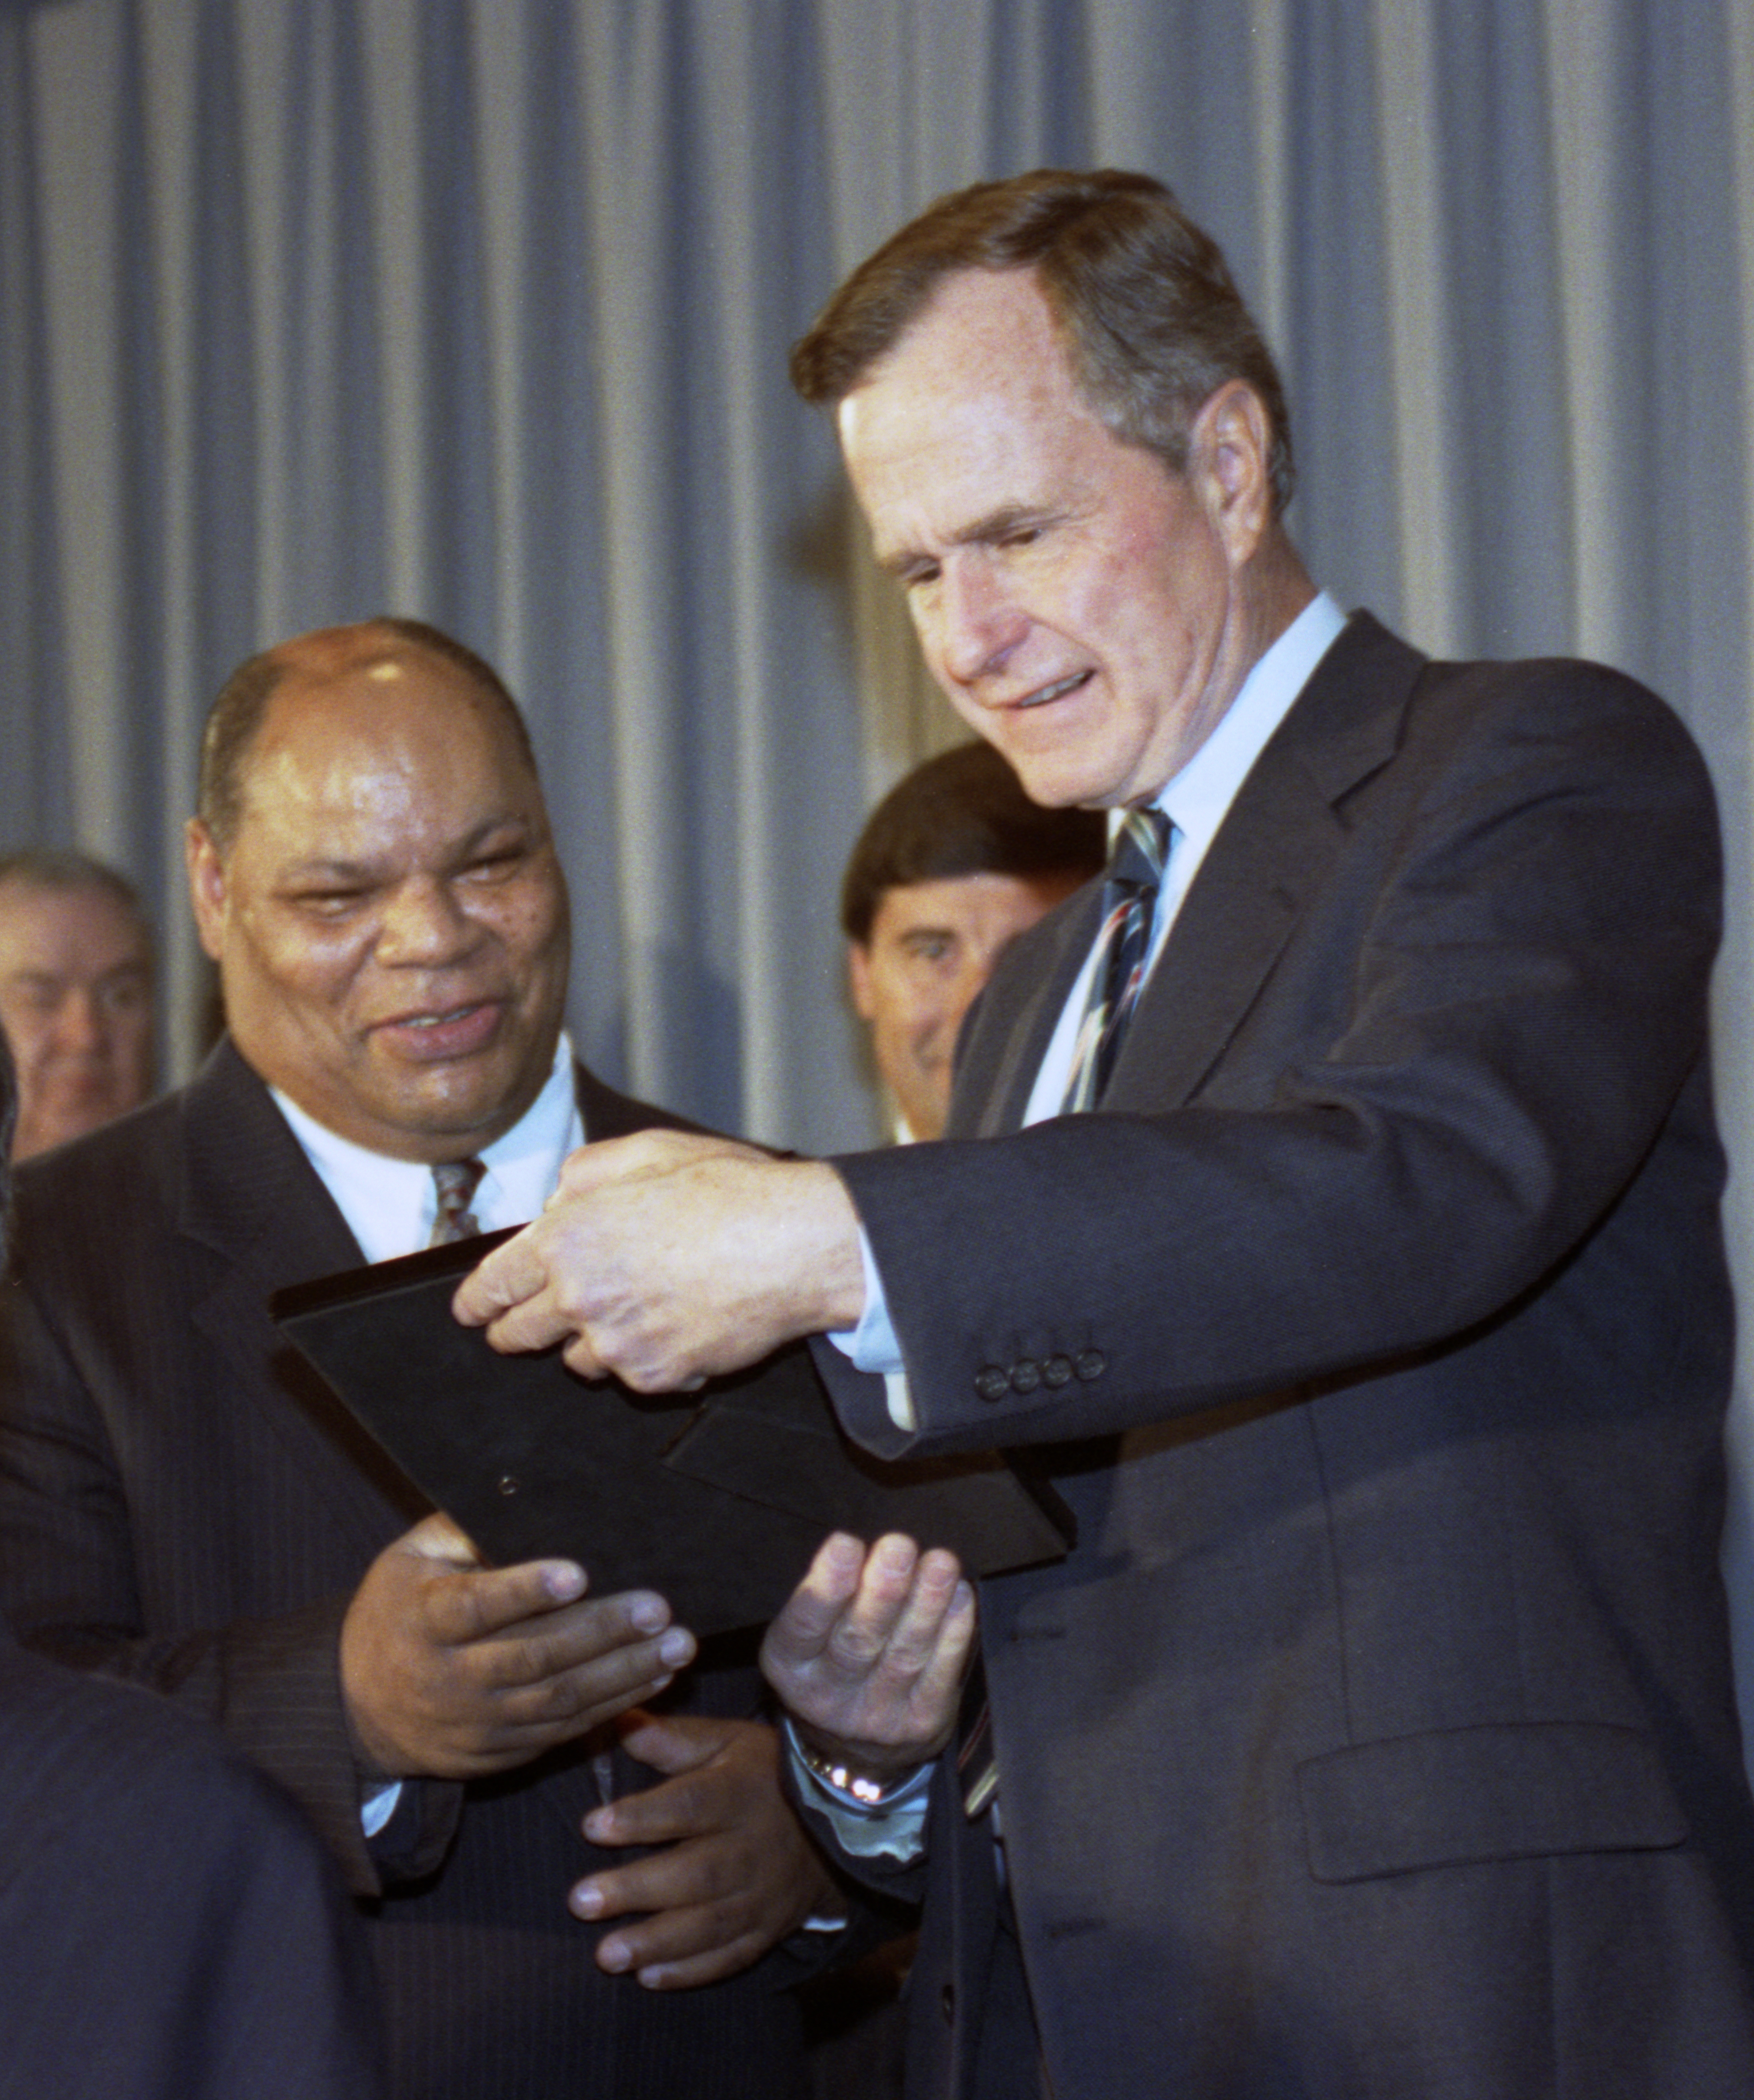 A photograph of President George HW Bush, a tall white man with greying hair wearing a suit, presenting a folder with an ADA award to Ronald Johnson, a shorter African American man with balding hair wearing a suit. The two men stand side by side and look at the award they both have a hand on. 